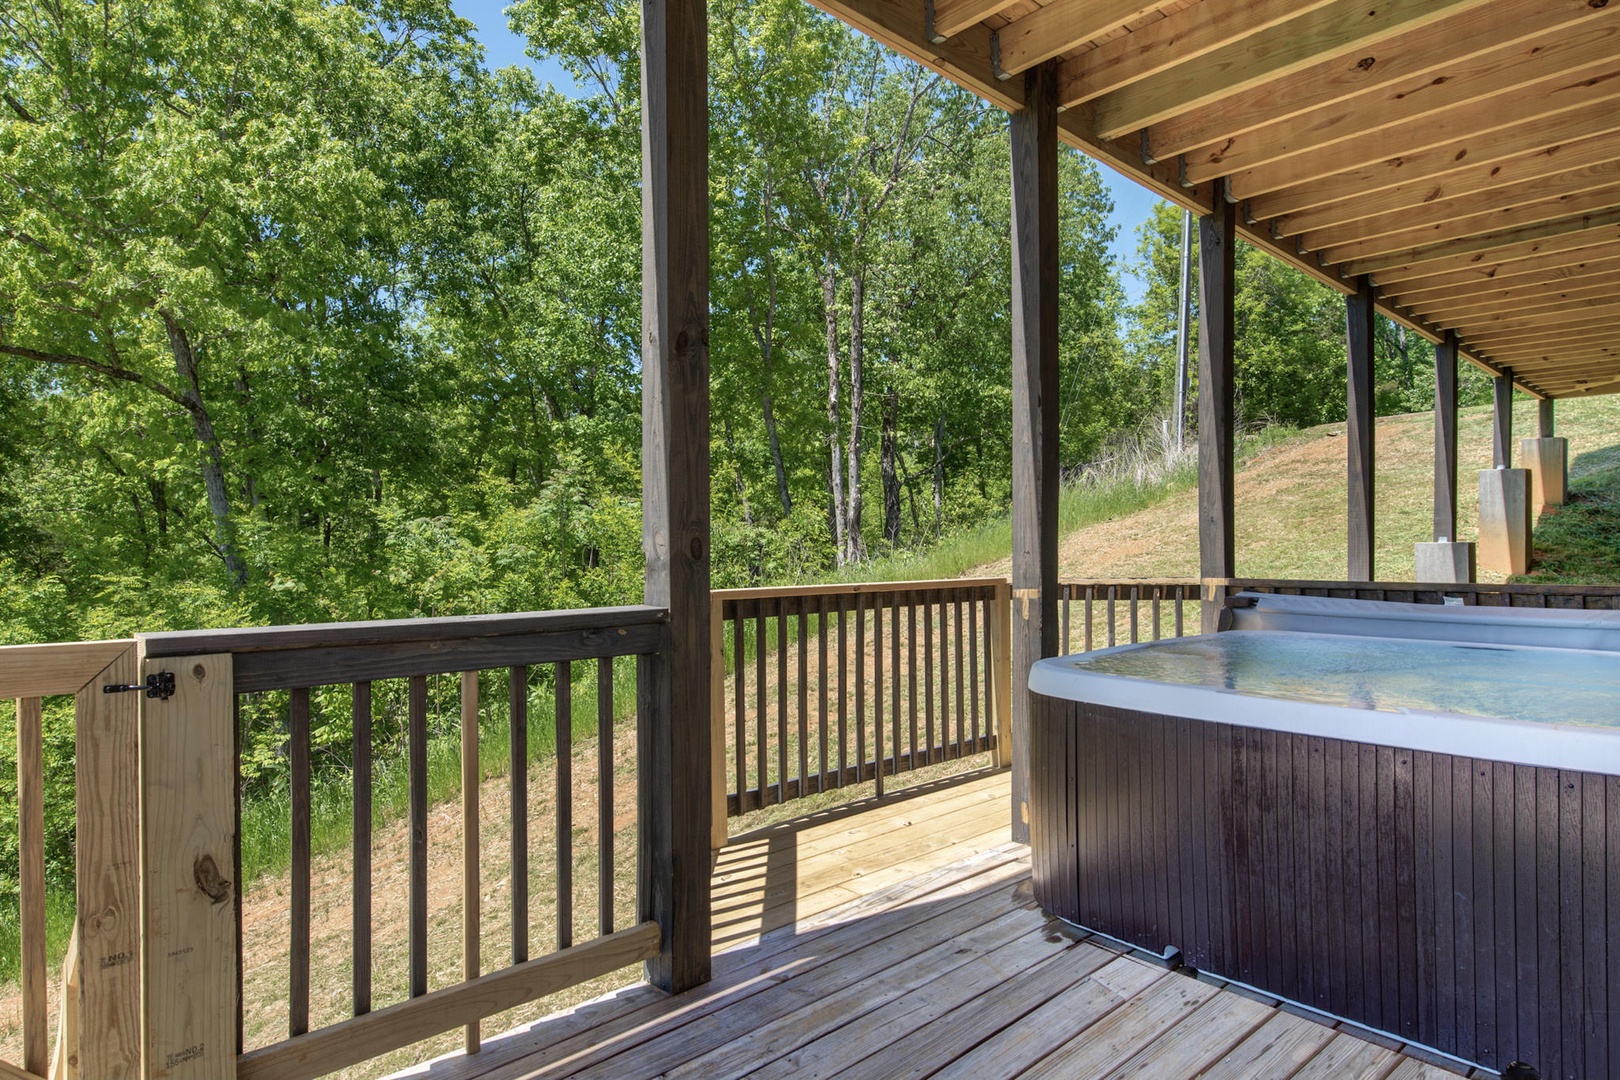 Covered hot tub on bottom deck